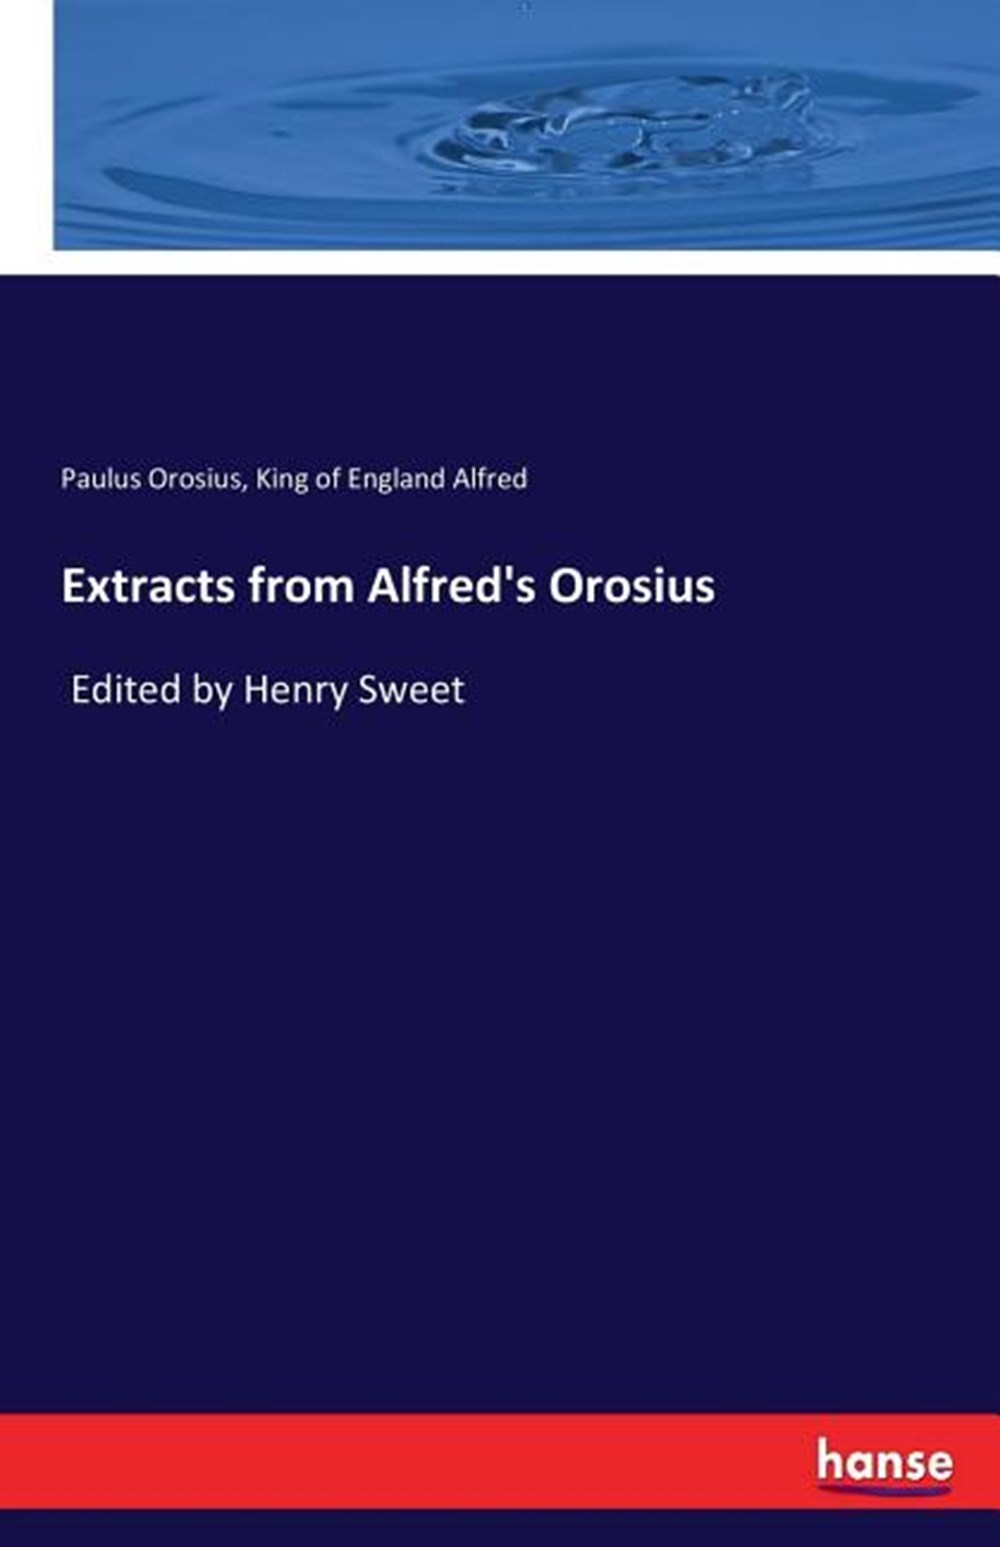 Extracts from Alfred's Orosius: Edited by Henry Sweet